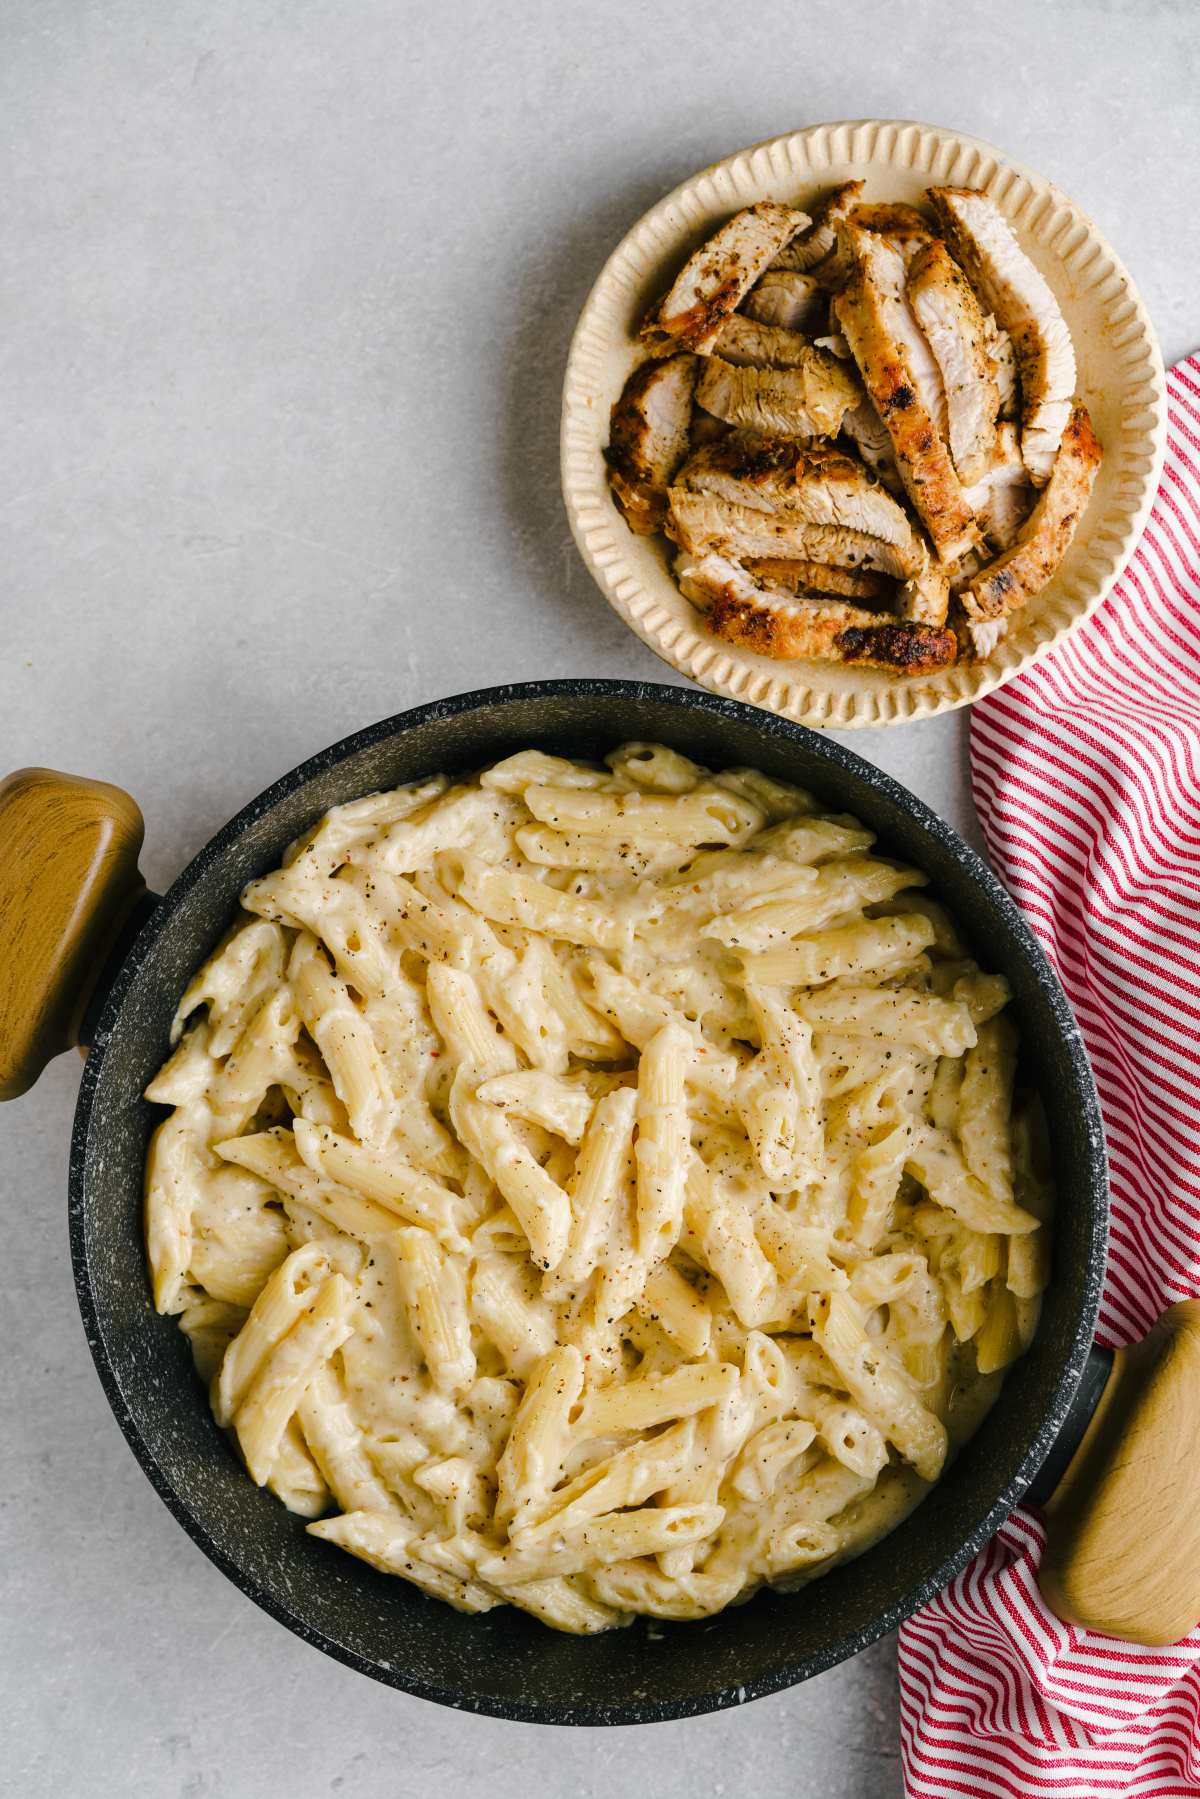 Creamy Parmesan Pasta in a bowl with chicken in a separate bowl.